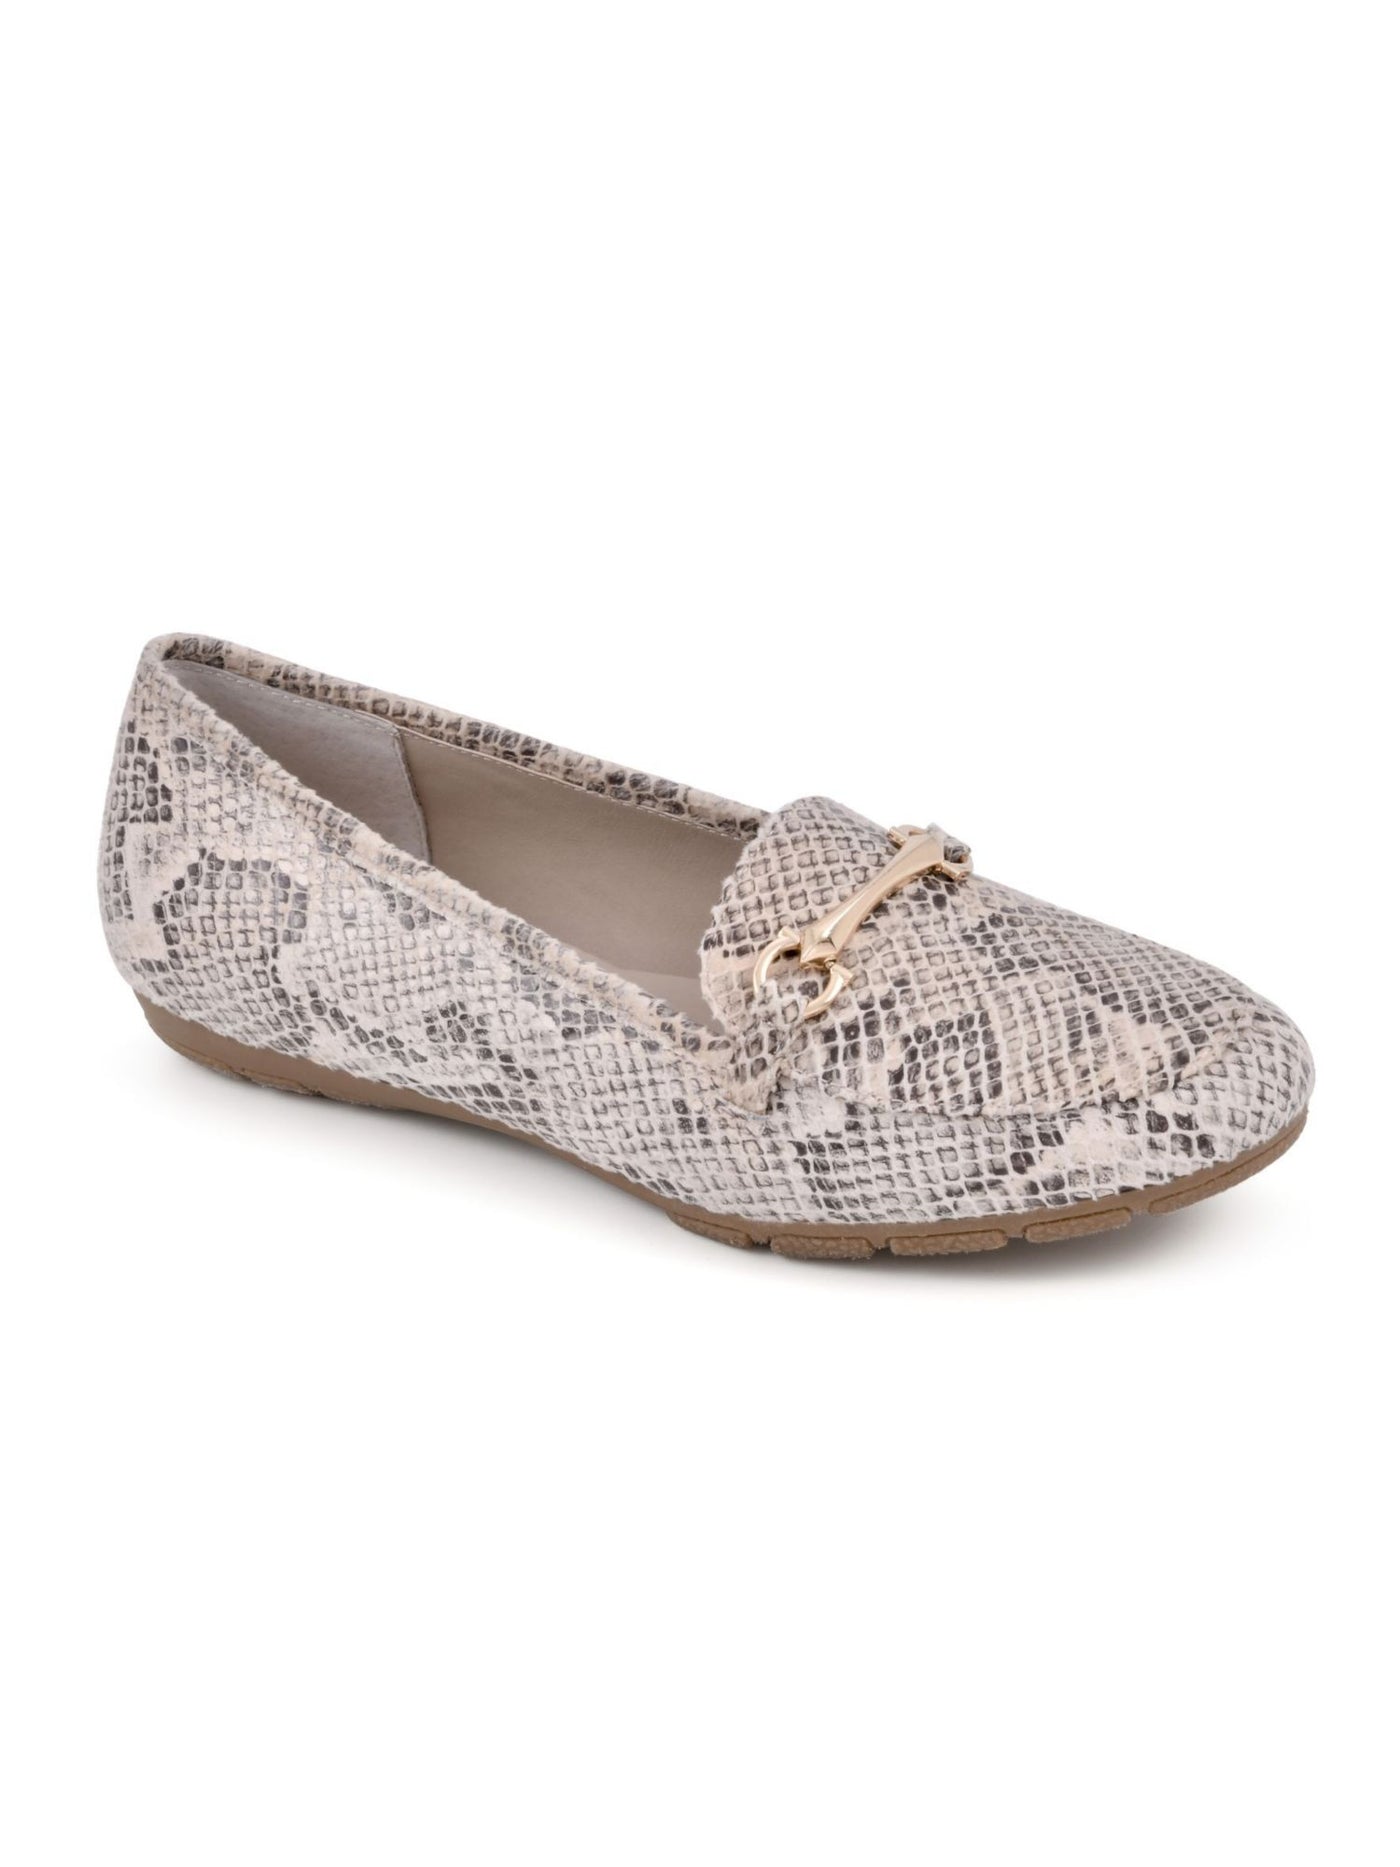 RIALTO Womens Beige Snake Print Metallic Bit Comfort Padded Treaded Guiding Round Toe Slip On Loafers Shoes 6 W